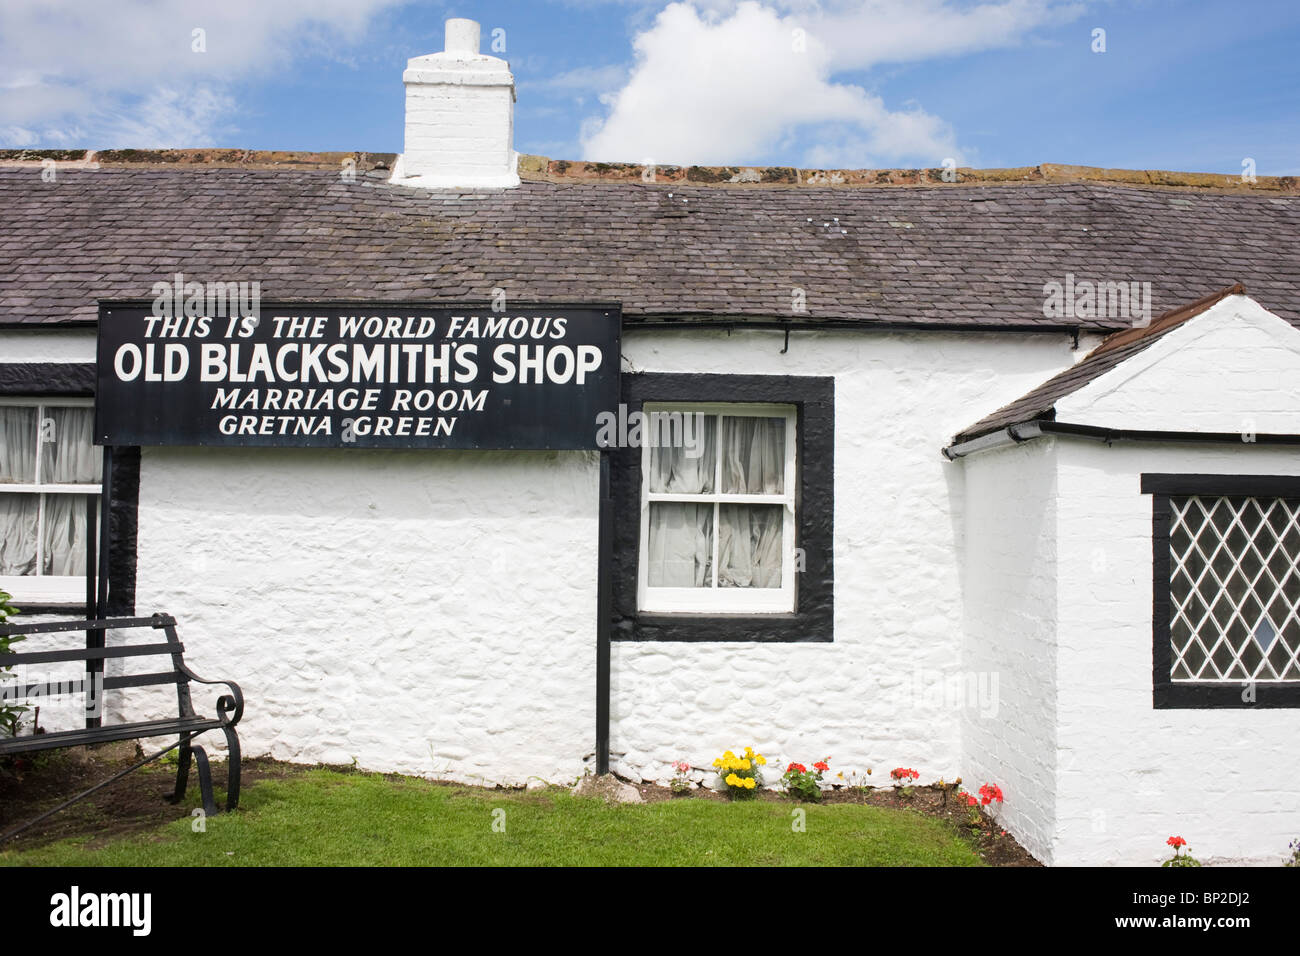 The world famous Old Blacksmith's Shop at Gretna Green, where Britain's wedding couples converge on for a quickie marriage. Stock Photo